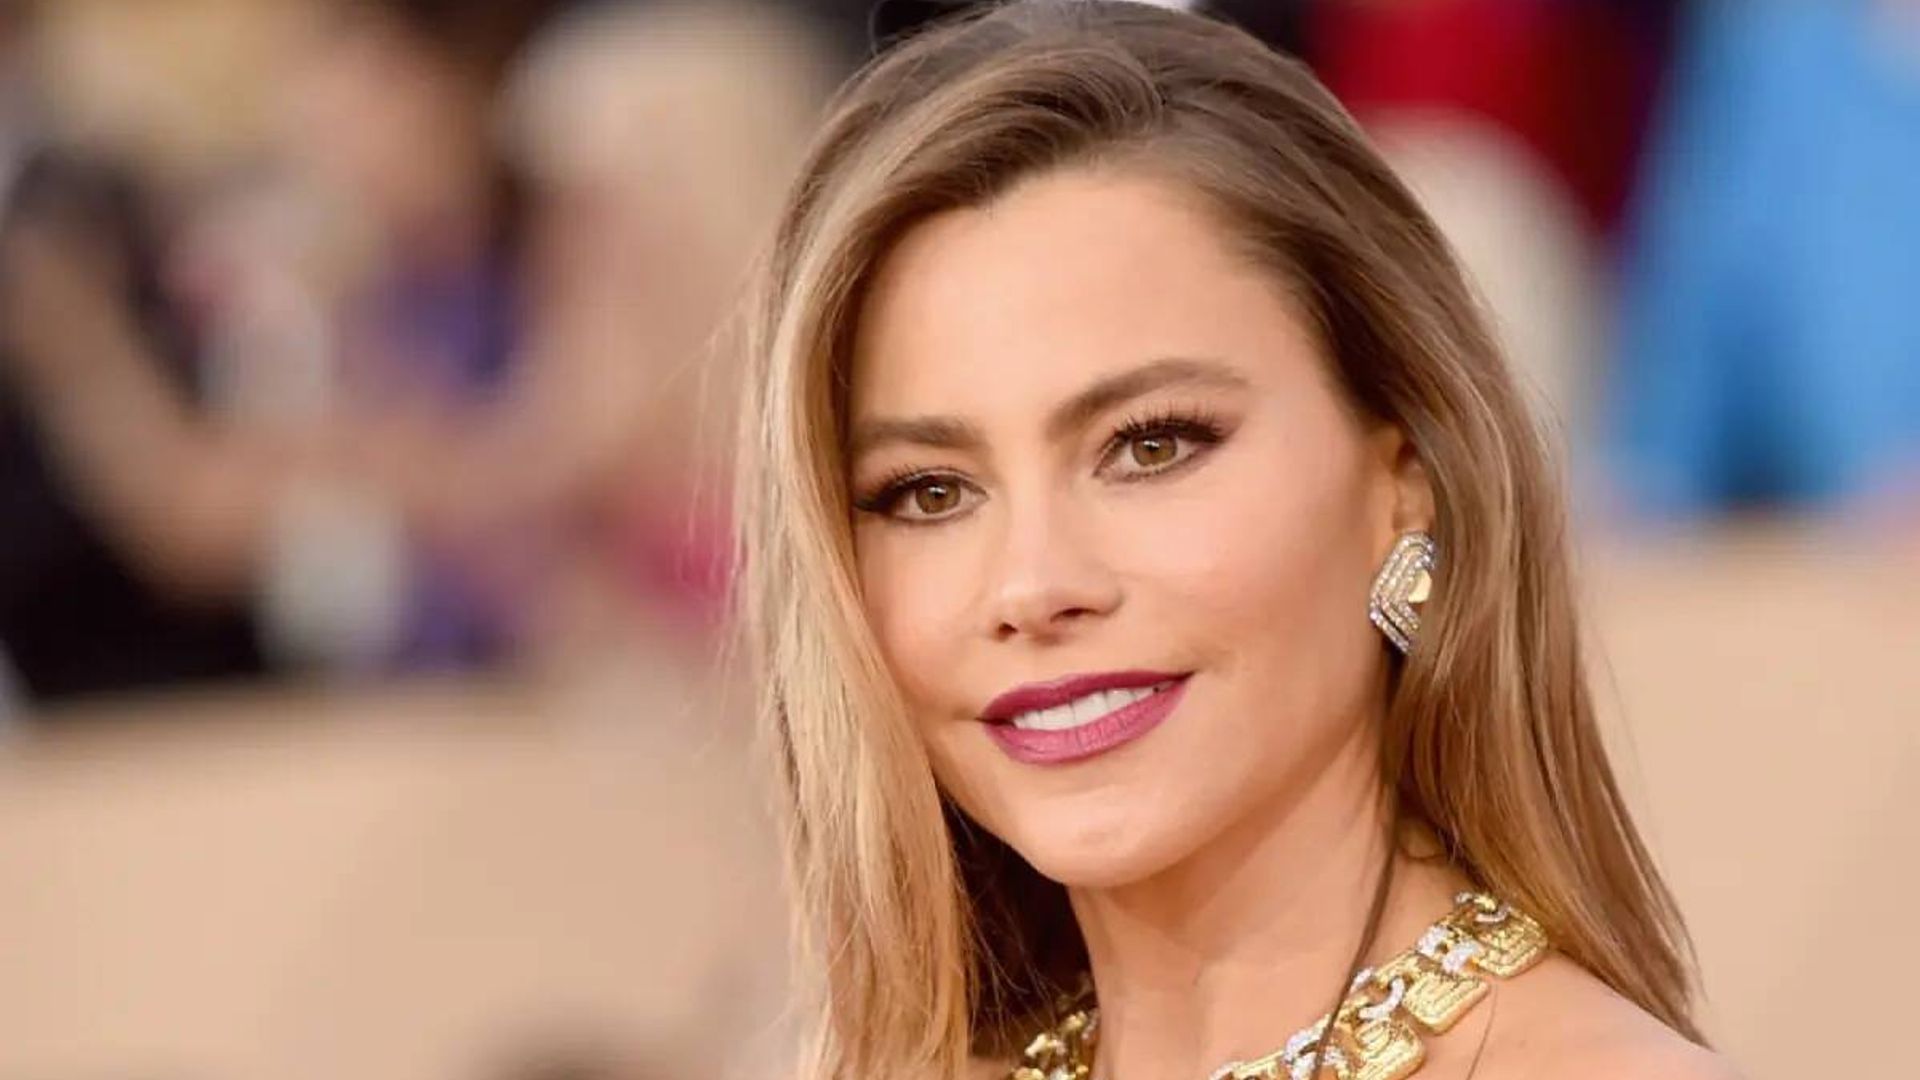 Sofia Vergara, 49, showcases incredible figure - and fans are freaking out